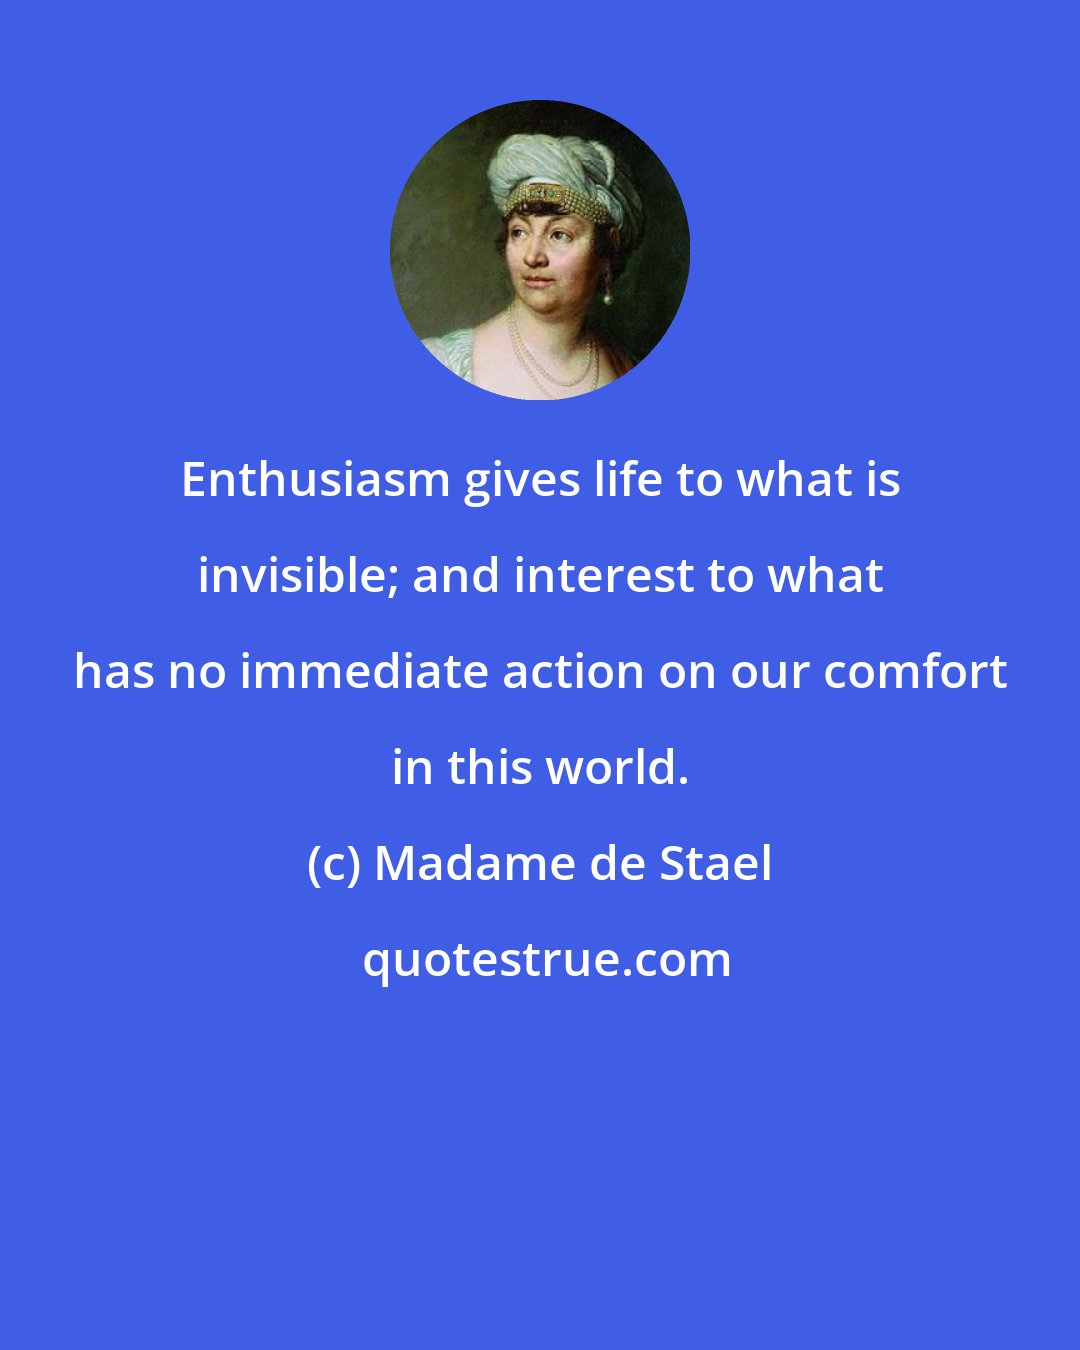 Madame de Stael: Enthusiasm gives life to what is invisible; and interest to what has no immediate action on our comfort in this world.